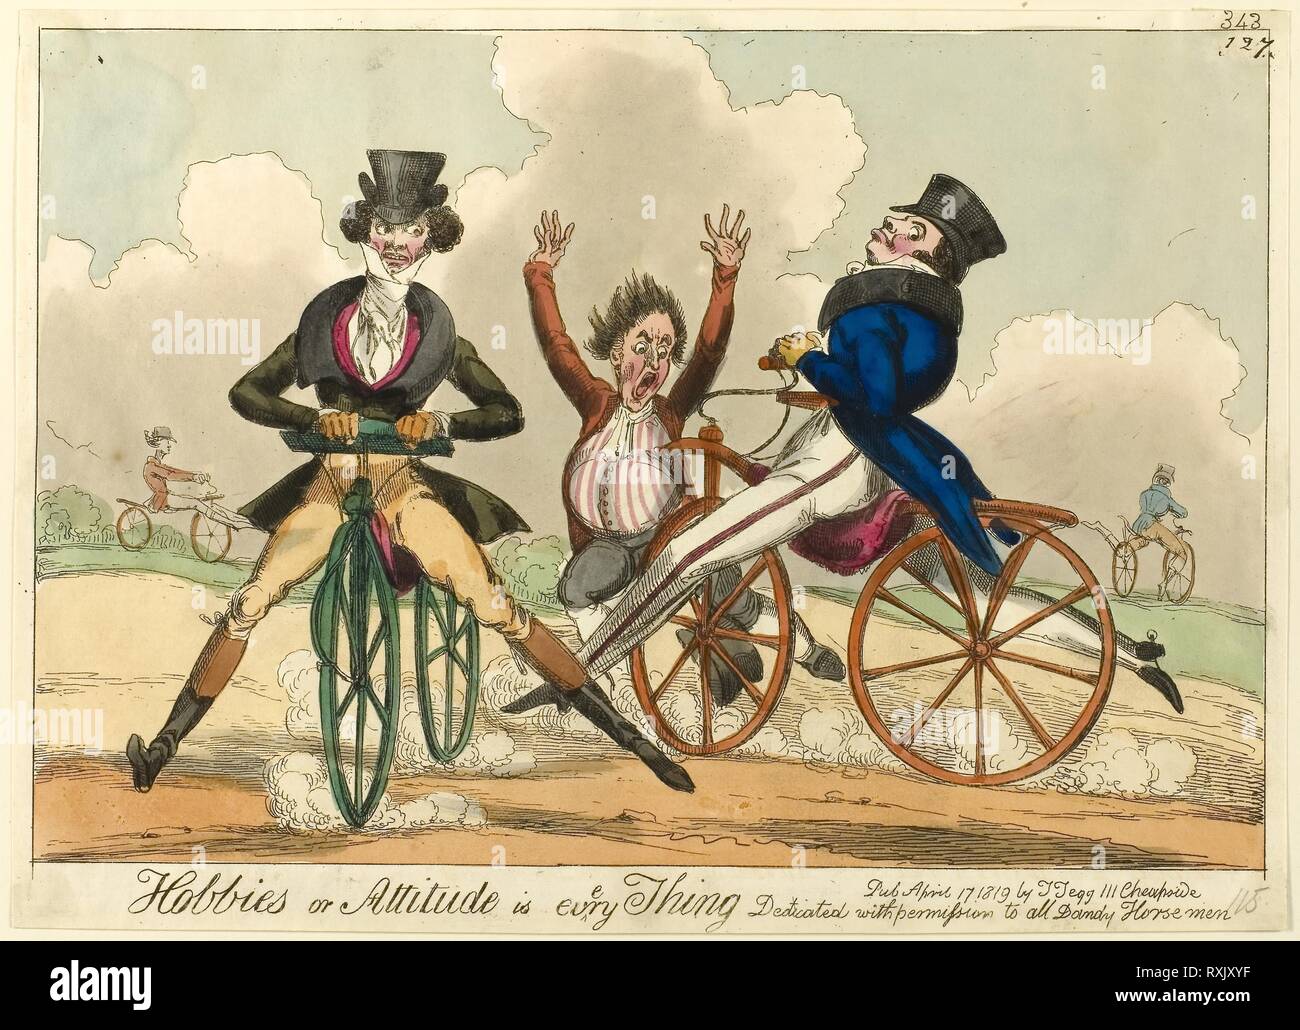 Hobbies or Attitude is Everything, Dedicated with permission to all Dandy Horsemen. Attributed to William Heath (English, 1794-1840); published by Thomas Tegg (English, 1776-1845). Date: 1819. Dimensions: 225 × 312 mm (image); 232 × 323 mm (sheet, trimmed within platemark). Hand-colored etching on ivory wove paper. Origin: England. Museum: The Chicago Art Institute. Stock Photo